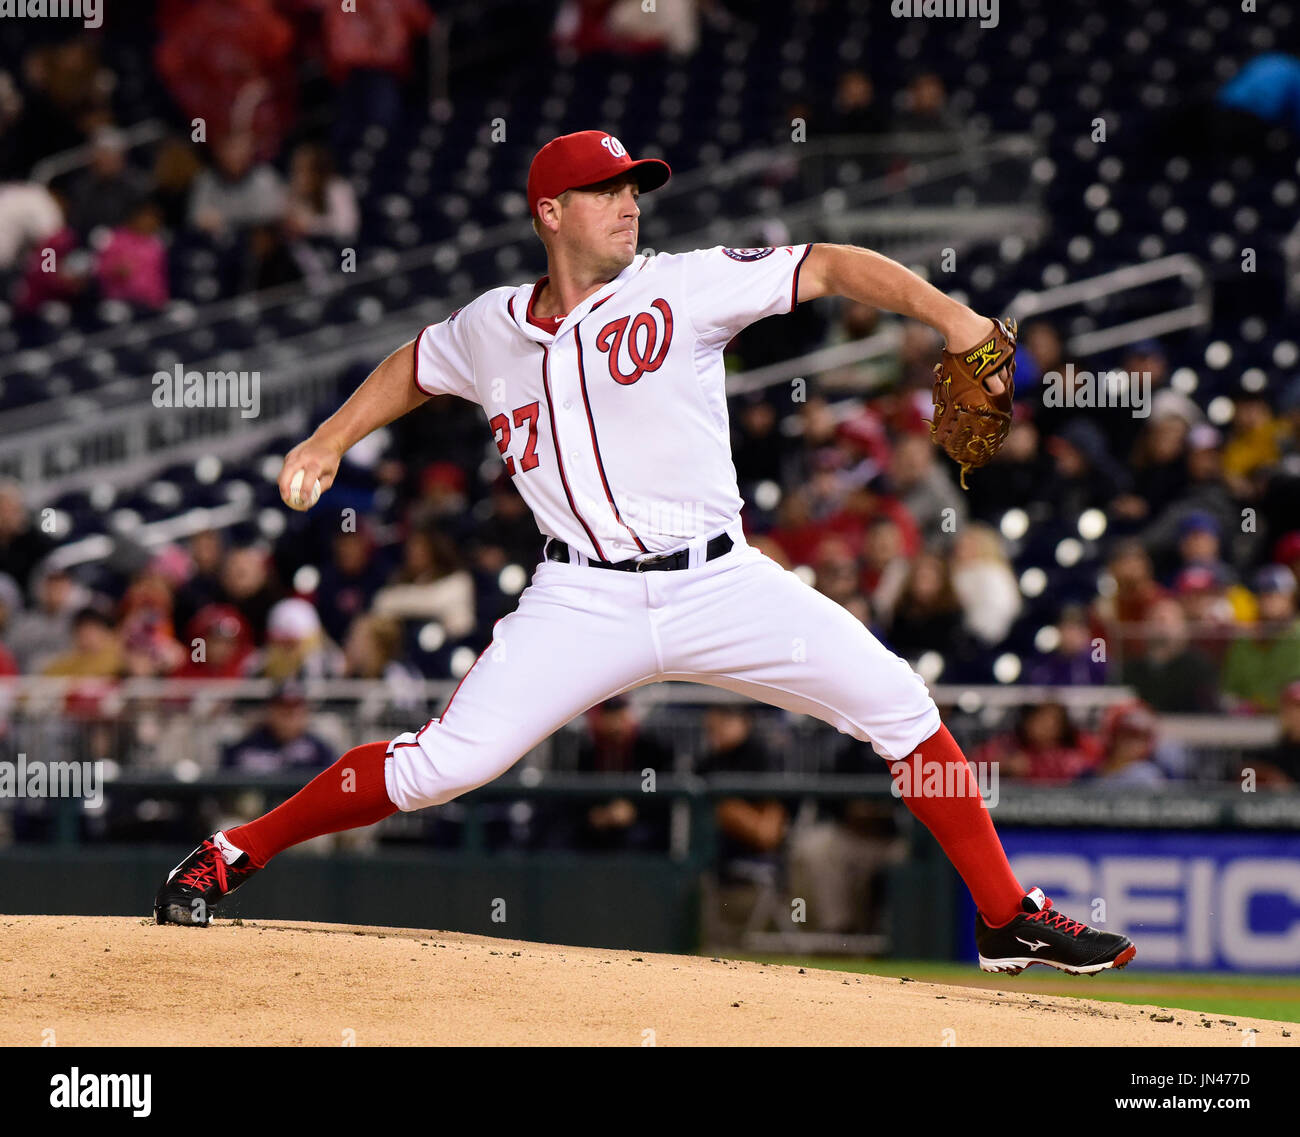 Washington Nationals pitcher Jordan Zimmermann (27) works in the first inning against the New York Mets at Nationals Park in Washington, D.C. on Wednesday, April 8, 2015. Credit: Ron Sachs / CNP (RESTRICTION: NO New York or New Jersey Newspapers or newspapers within a 75 mile radius of New York City) Stock Photo